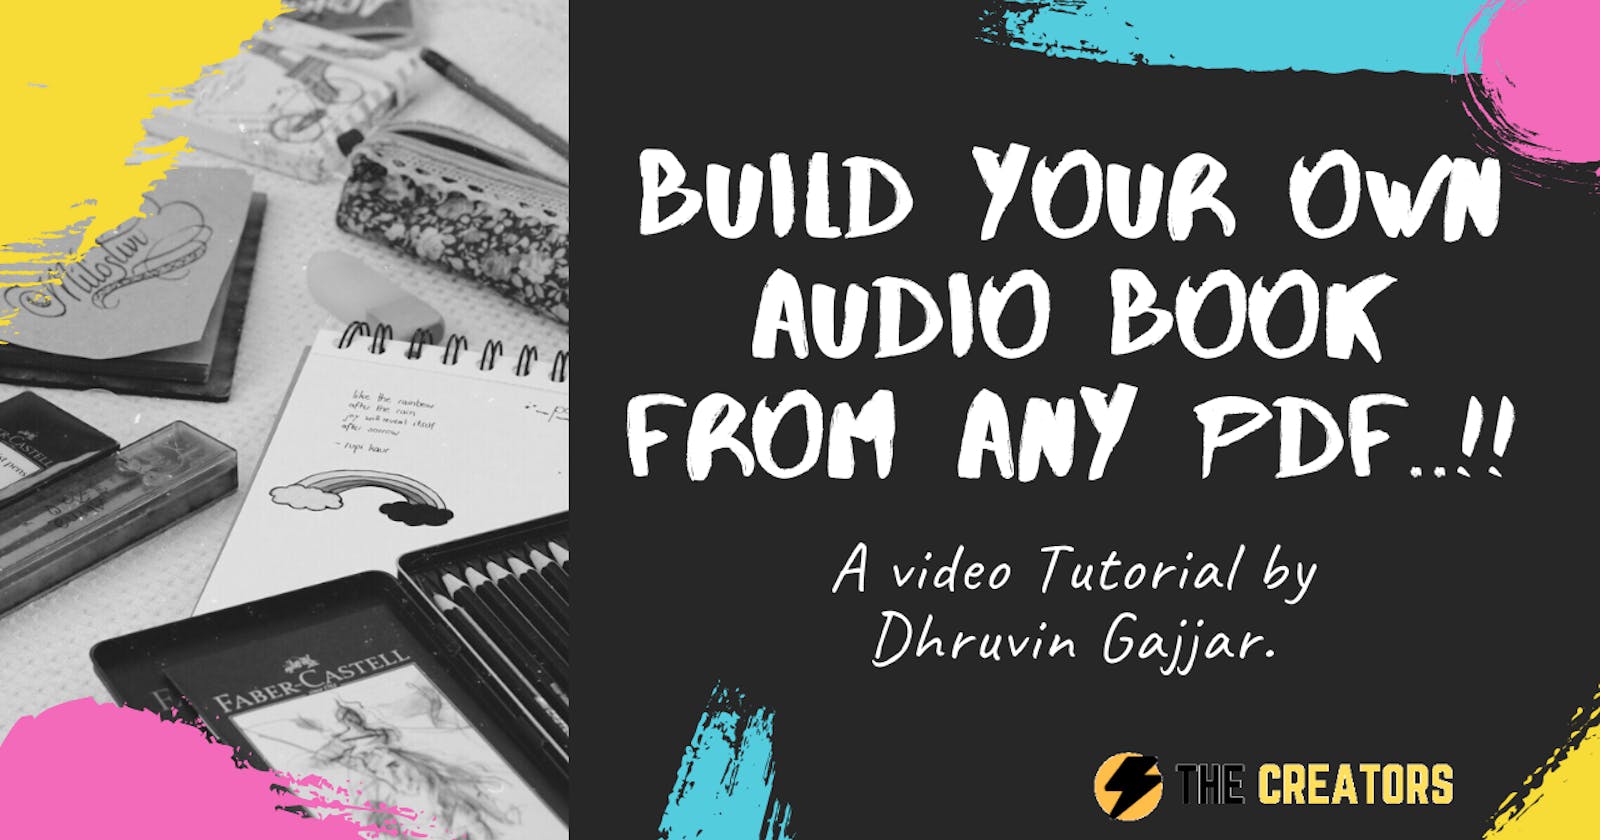 Build your own Audio book from any PDF with use of Python..🐍